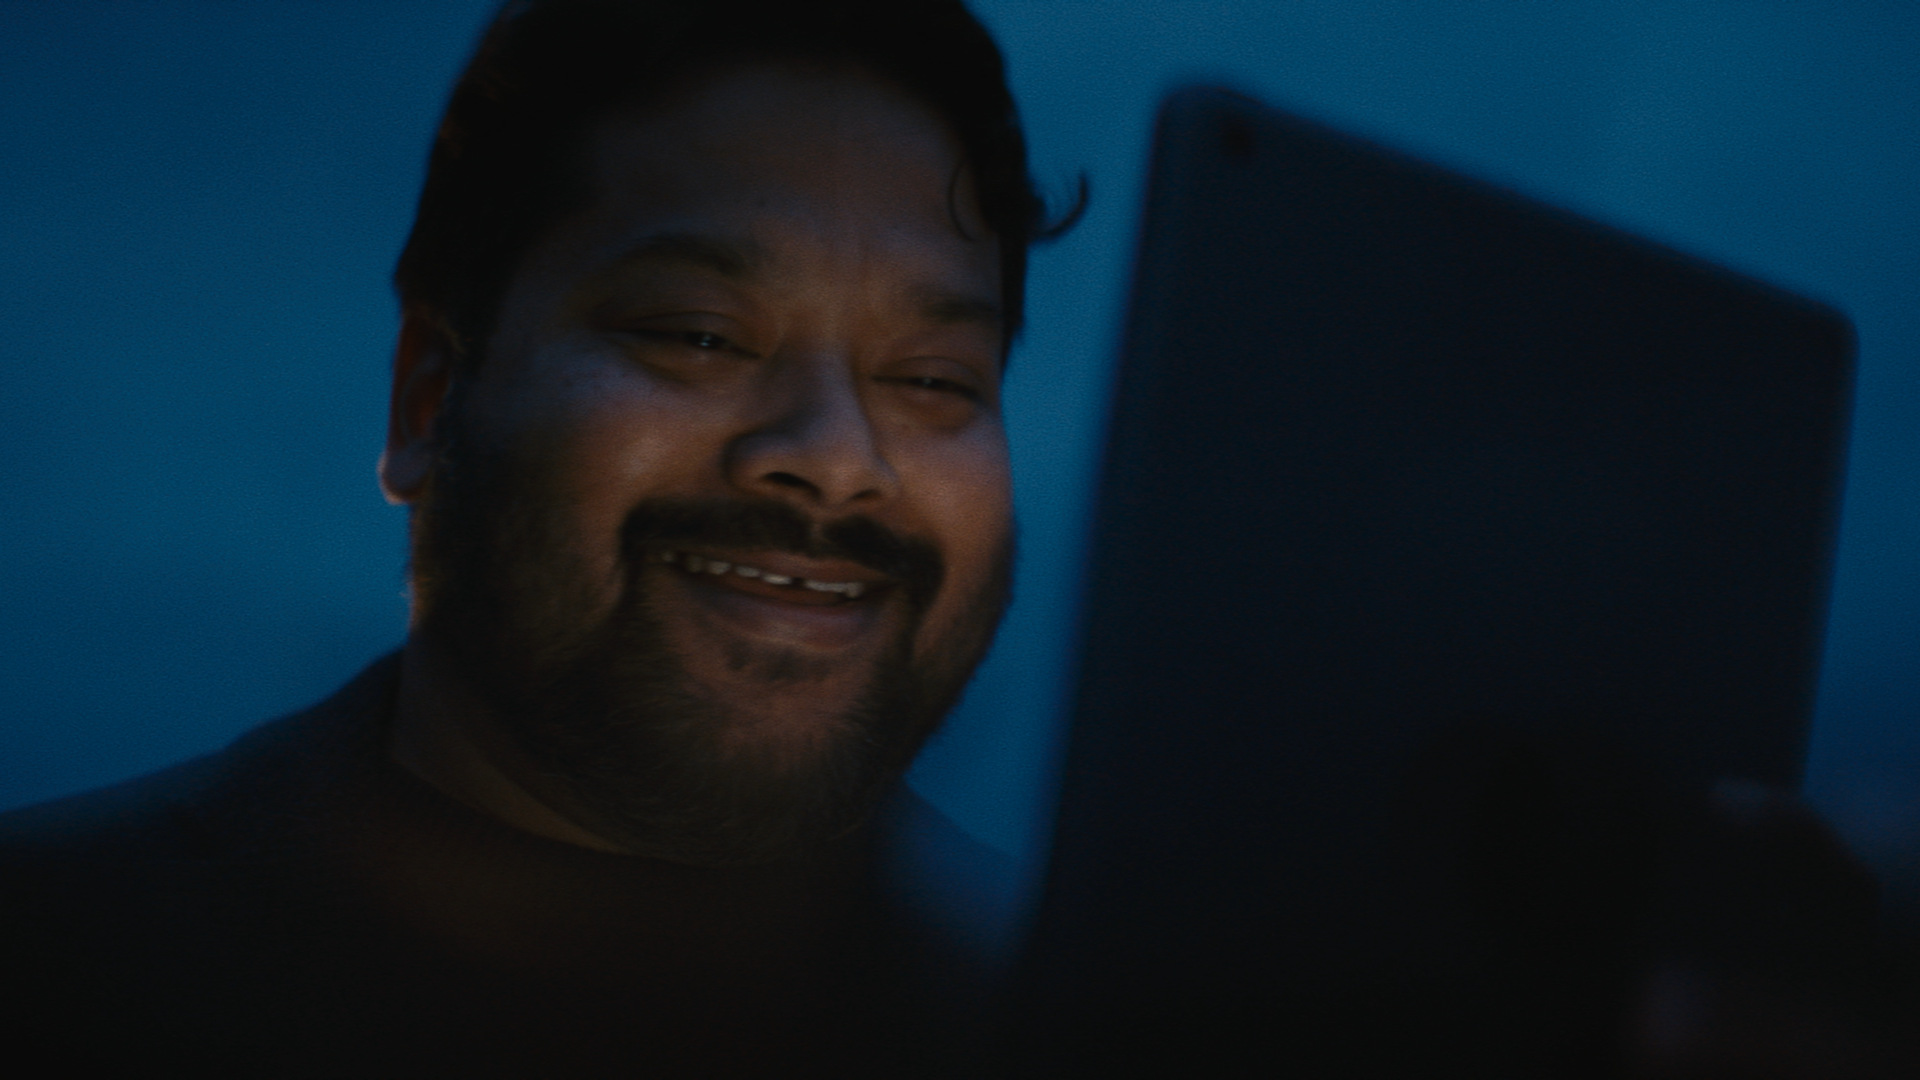 A man smiles as he looks at a tablet that lights up his face.